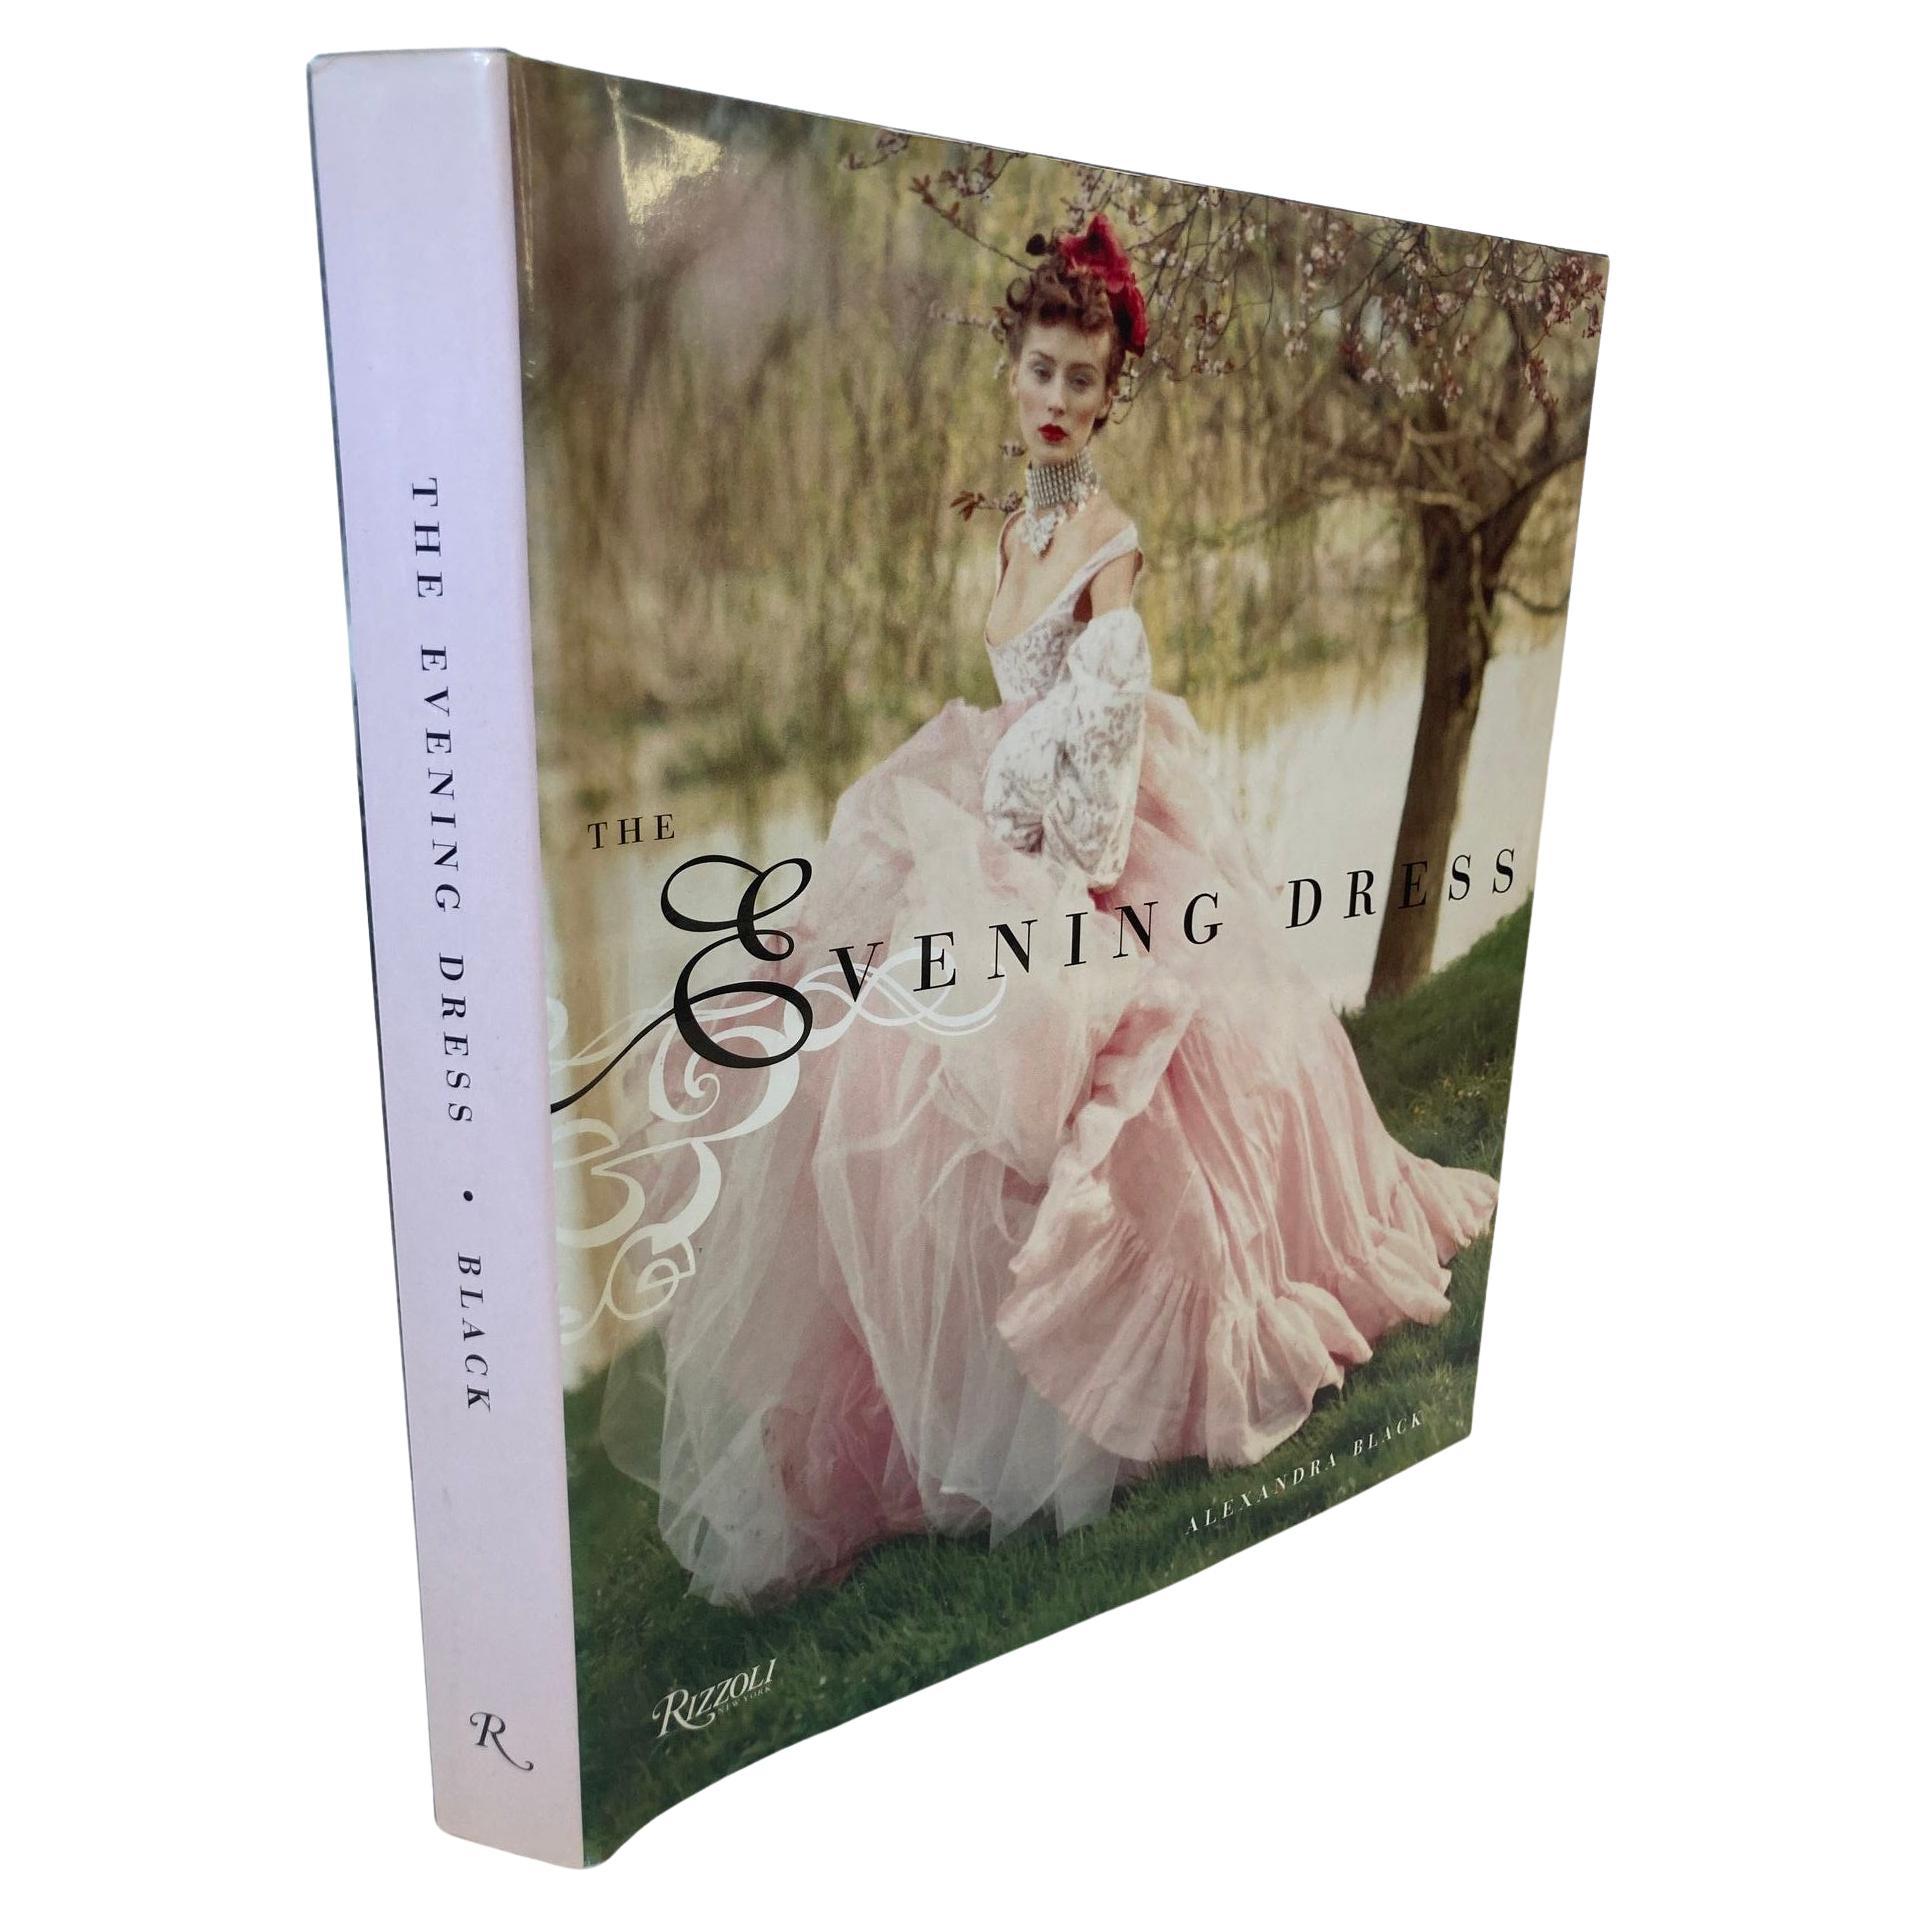 Evening Dress Hardcover Book First Edition By Alexandra Black, 2004 Rizzoli For Sale